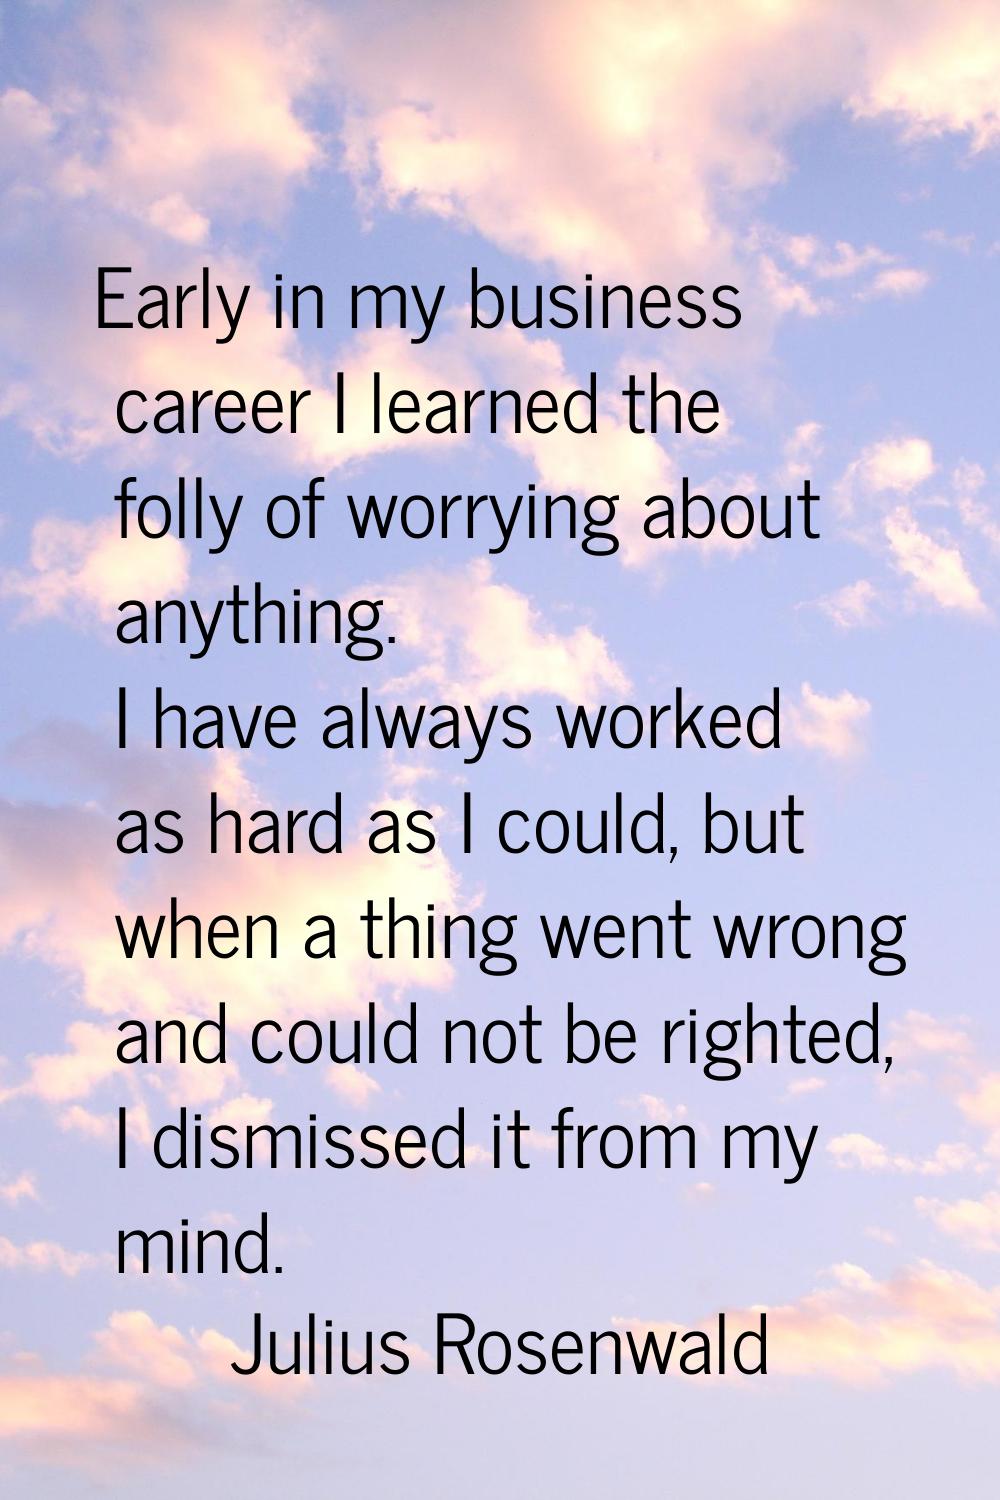 Early in my business career I learned the folly of worrying about anything. I have always worked as